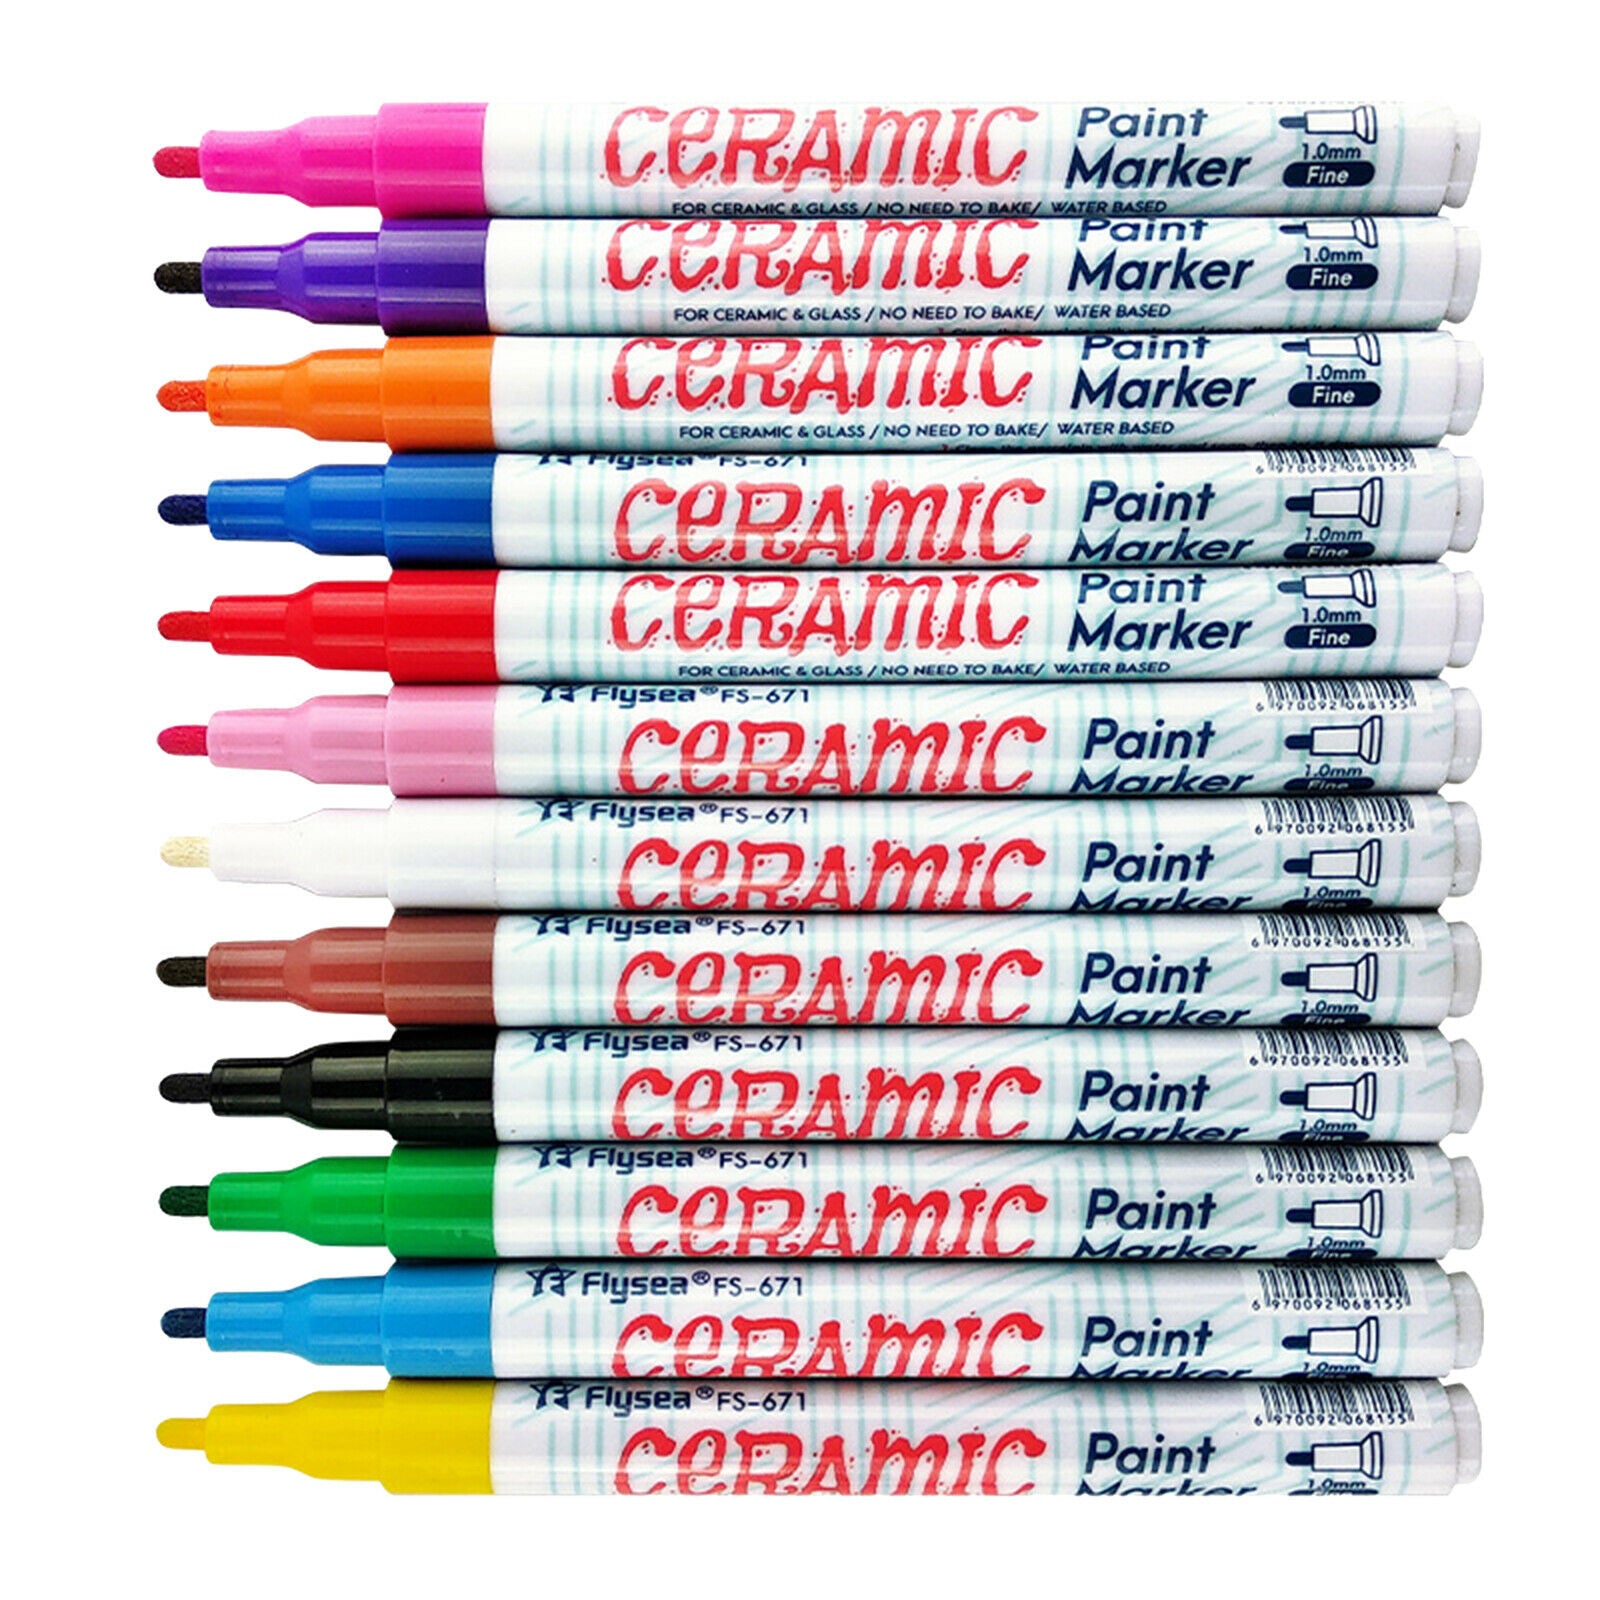 1.0mm Paint Marker 12 Color Water-based Paint Marker Pen for Ceramic Glass